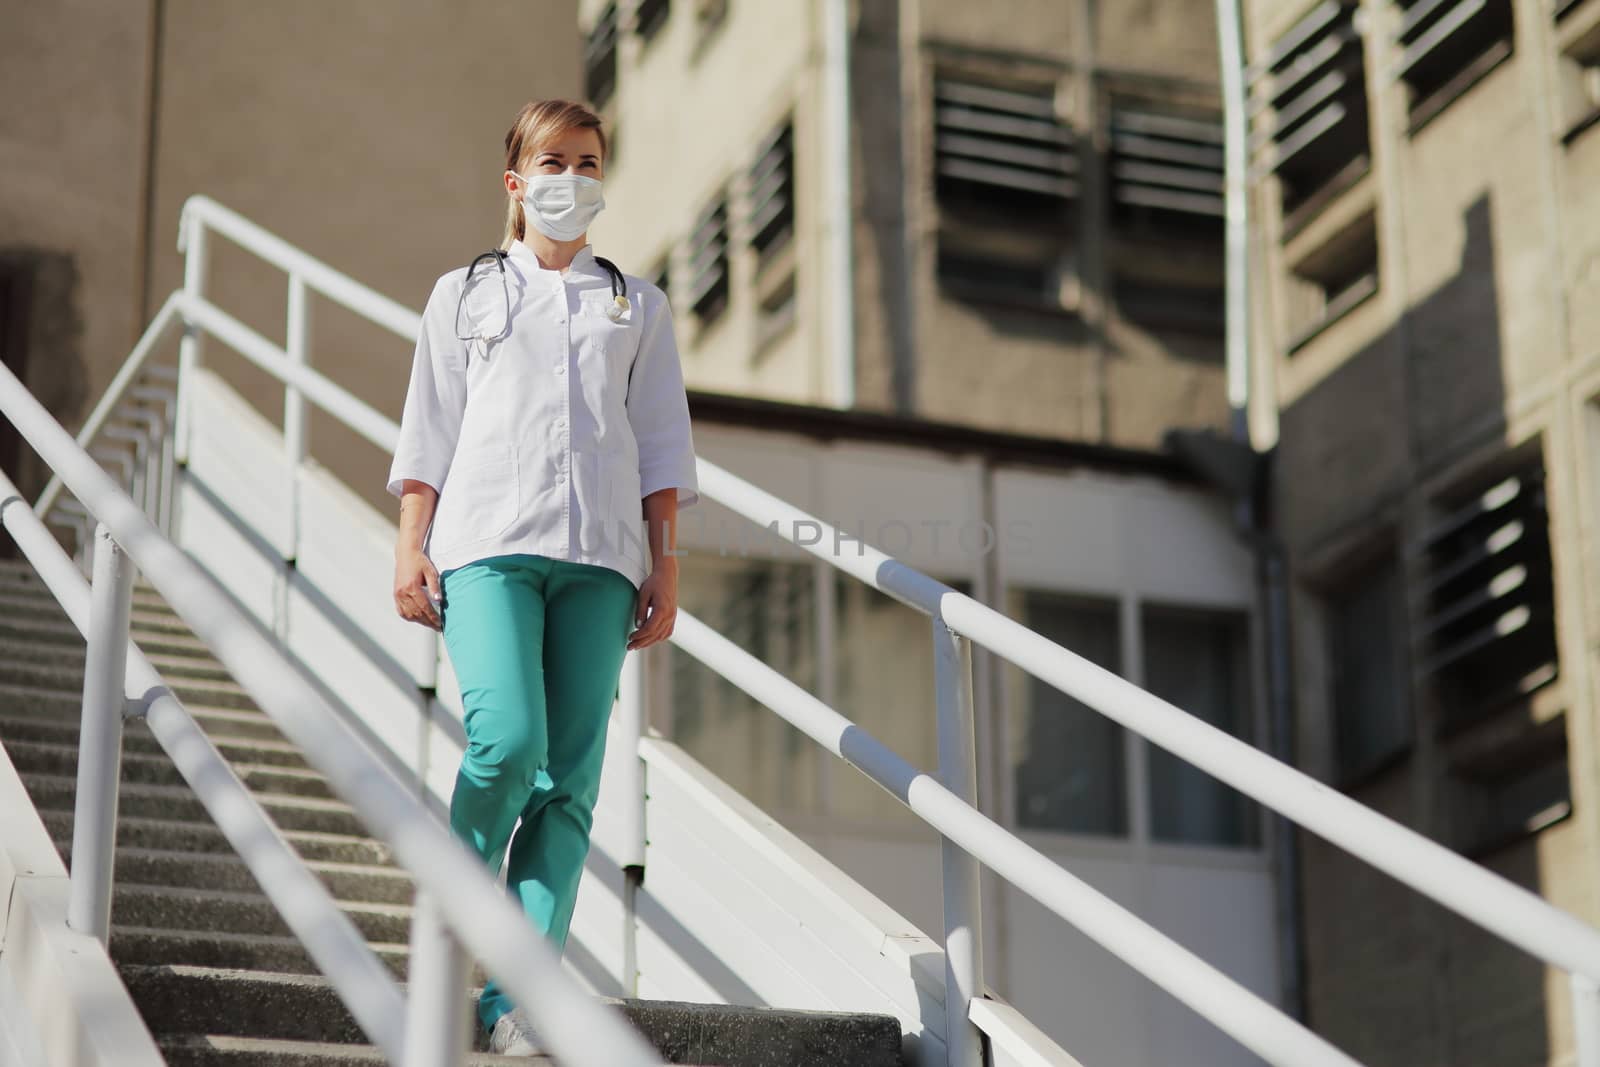 Female doctor or nurse in a protective face mask walking up the stairs. Safety measures against the coronavirus. Prevention Covid-19 healthcare concept. Stethoscope over the neck. Woman, girl.